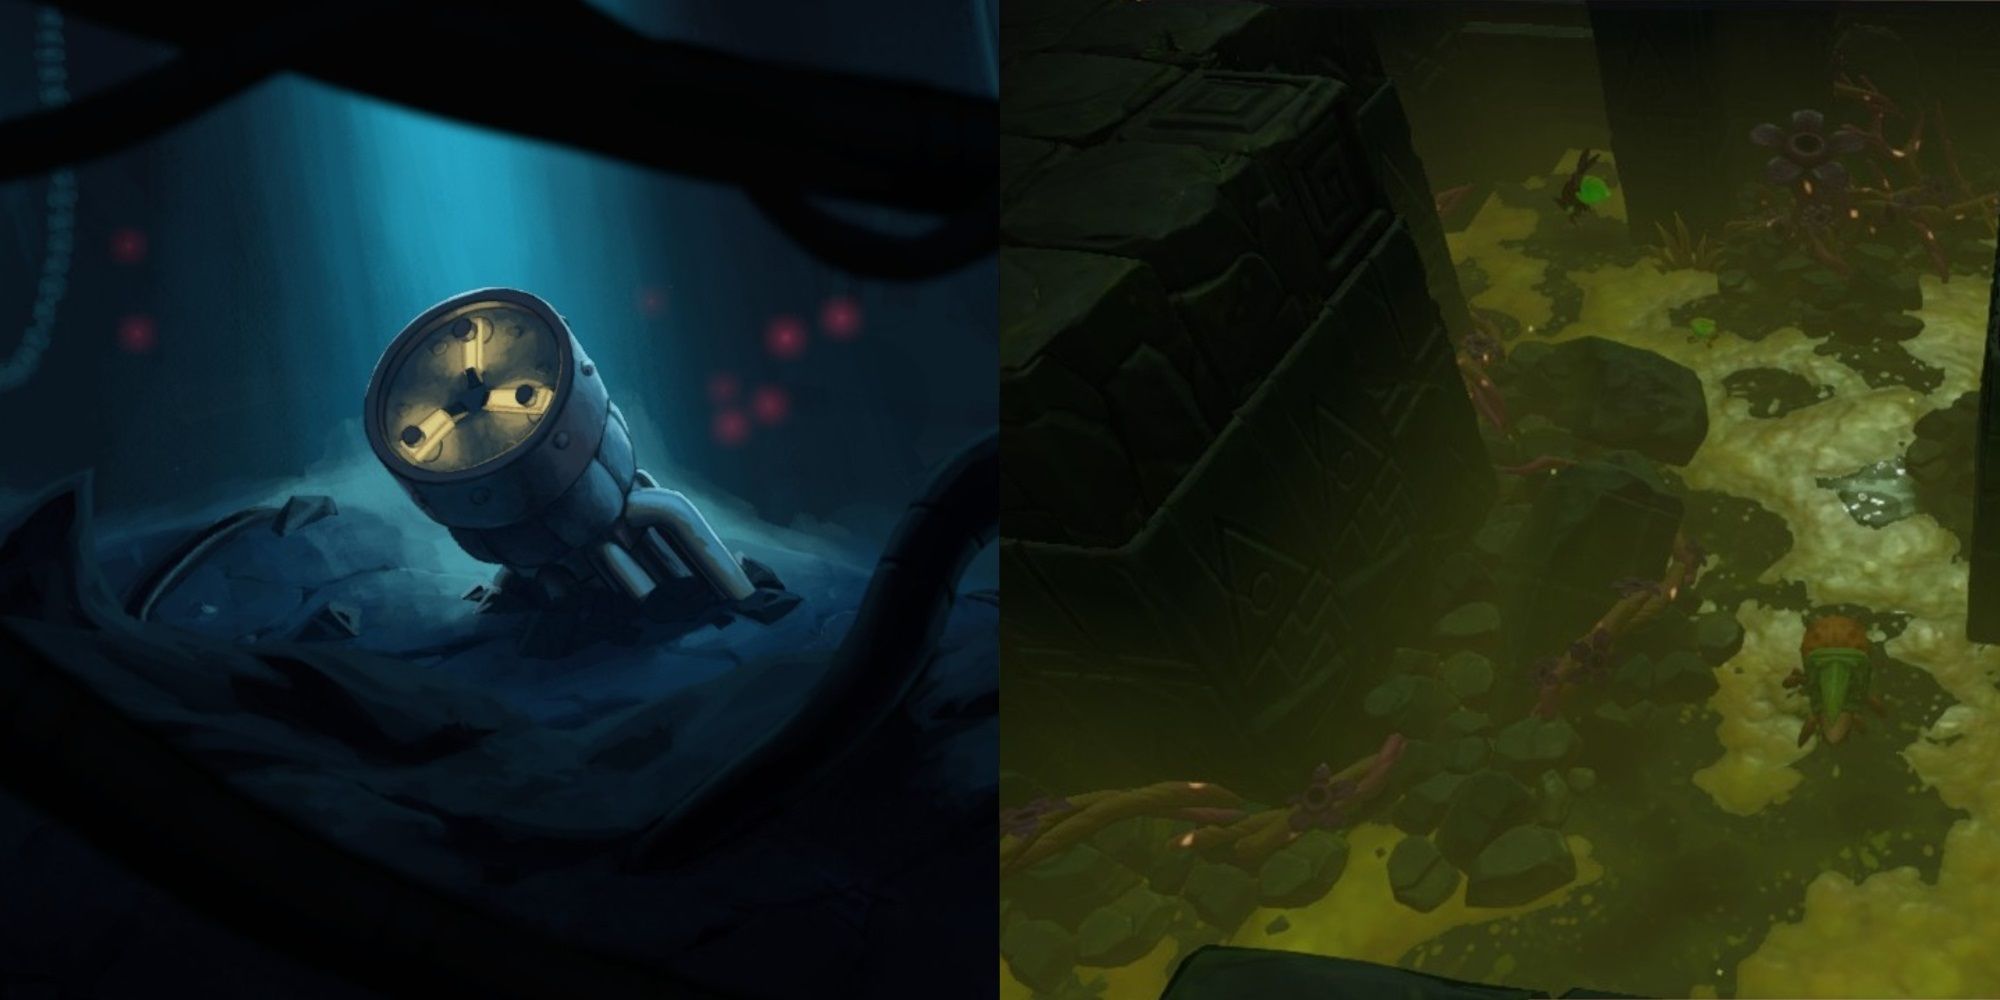 Split image featuring cutscene art of a Rocket Part in the dirt with red eyes in the distance and a section of Marshy Ruins showing ruins, Beetle enemies and vines in its depths in Steamworld Build.